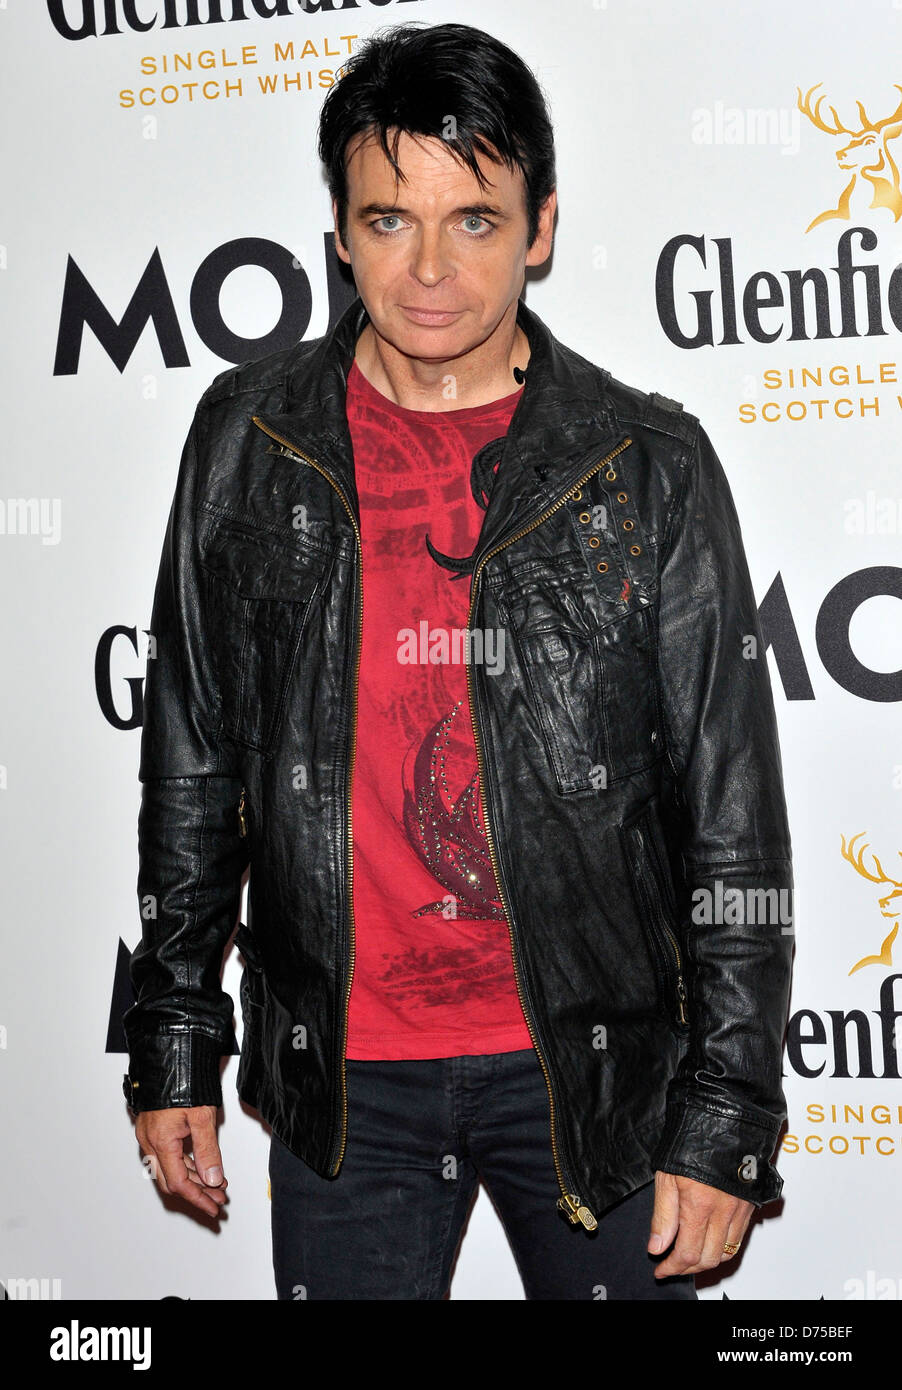 Gary Numan Glenfiddich Mojo Honours List 2011 Awards Ceremony, held at The Brewery - Arrivals London, England - 21.07.11 Stock Photo